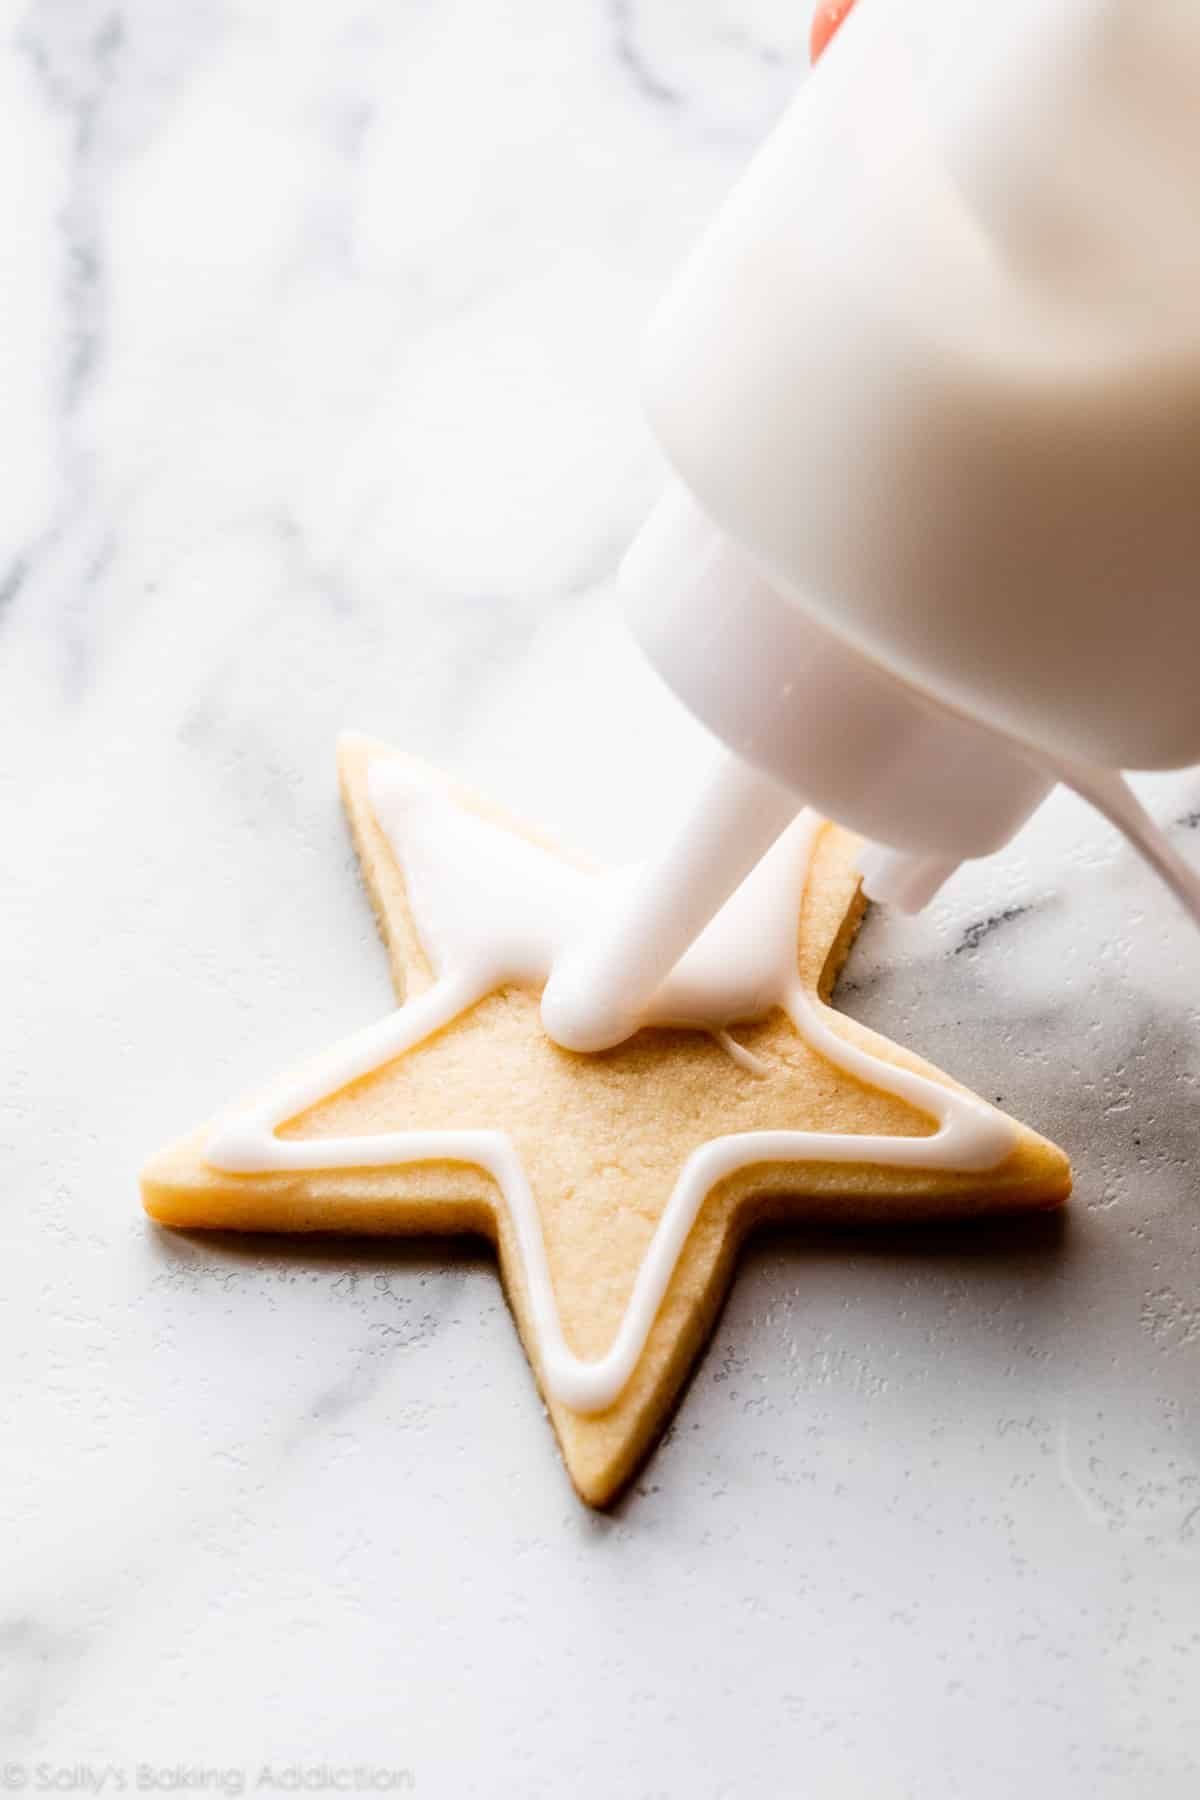 decorating a sugar cookie with white icing using a squeeze bottle